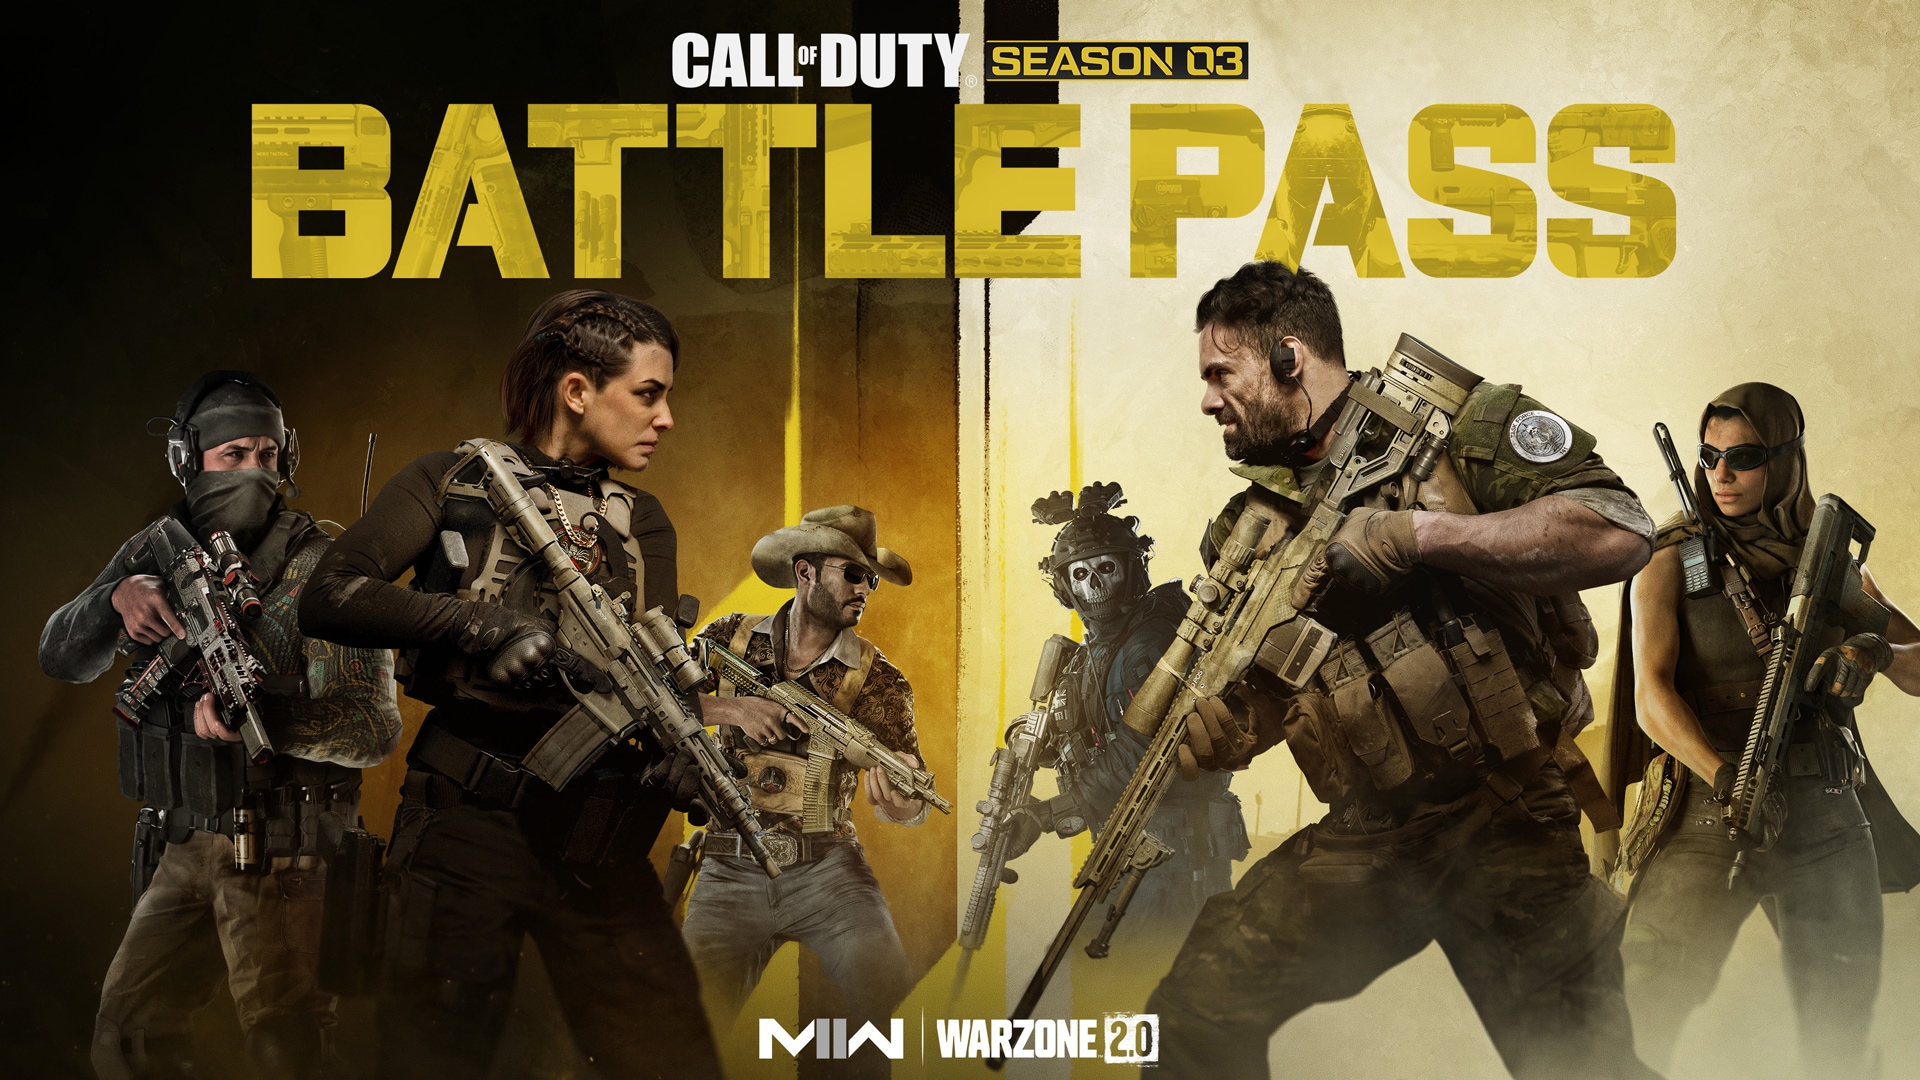 Introducing the Battle Pass and Bundles for Call of Duty: Modern